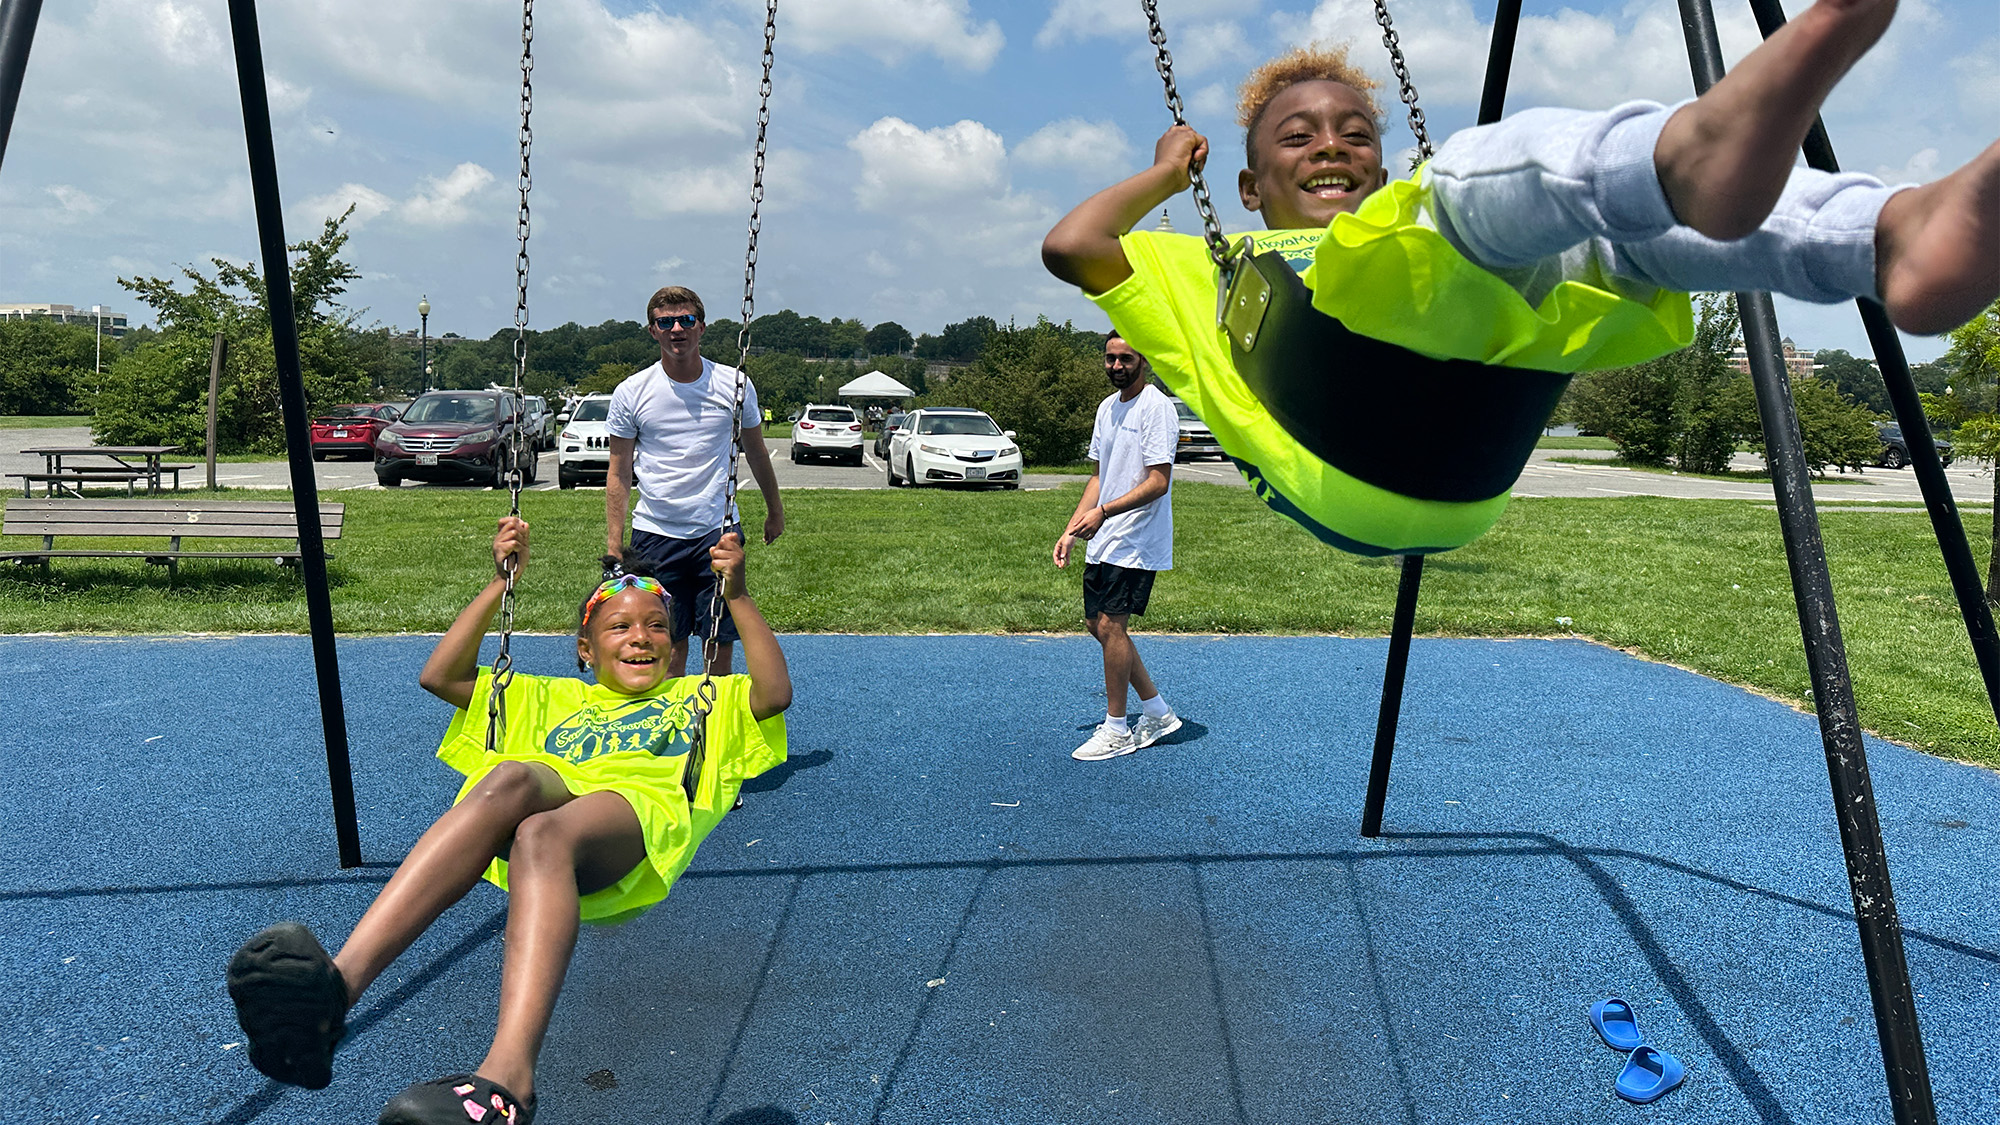 Two medical students push two children on swings on a swingset during HOYA Summer Sports Camp